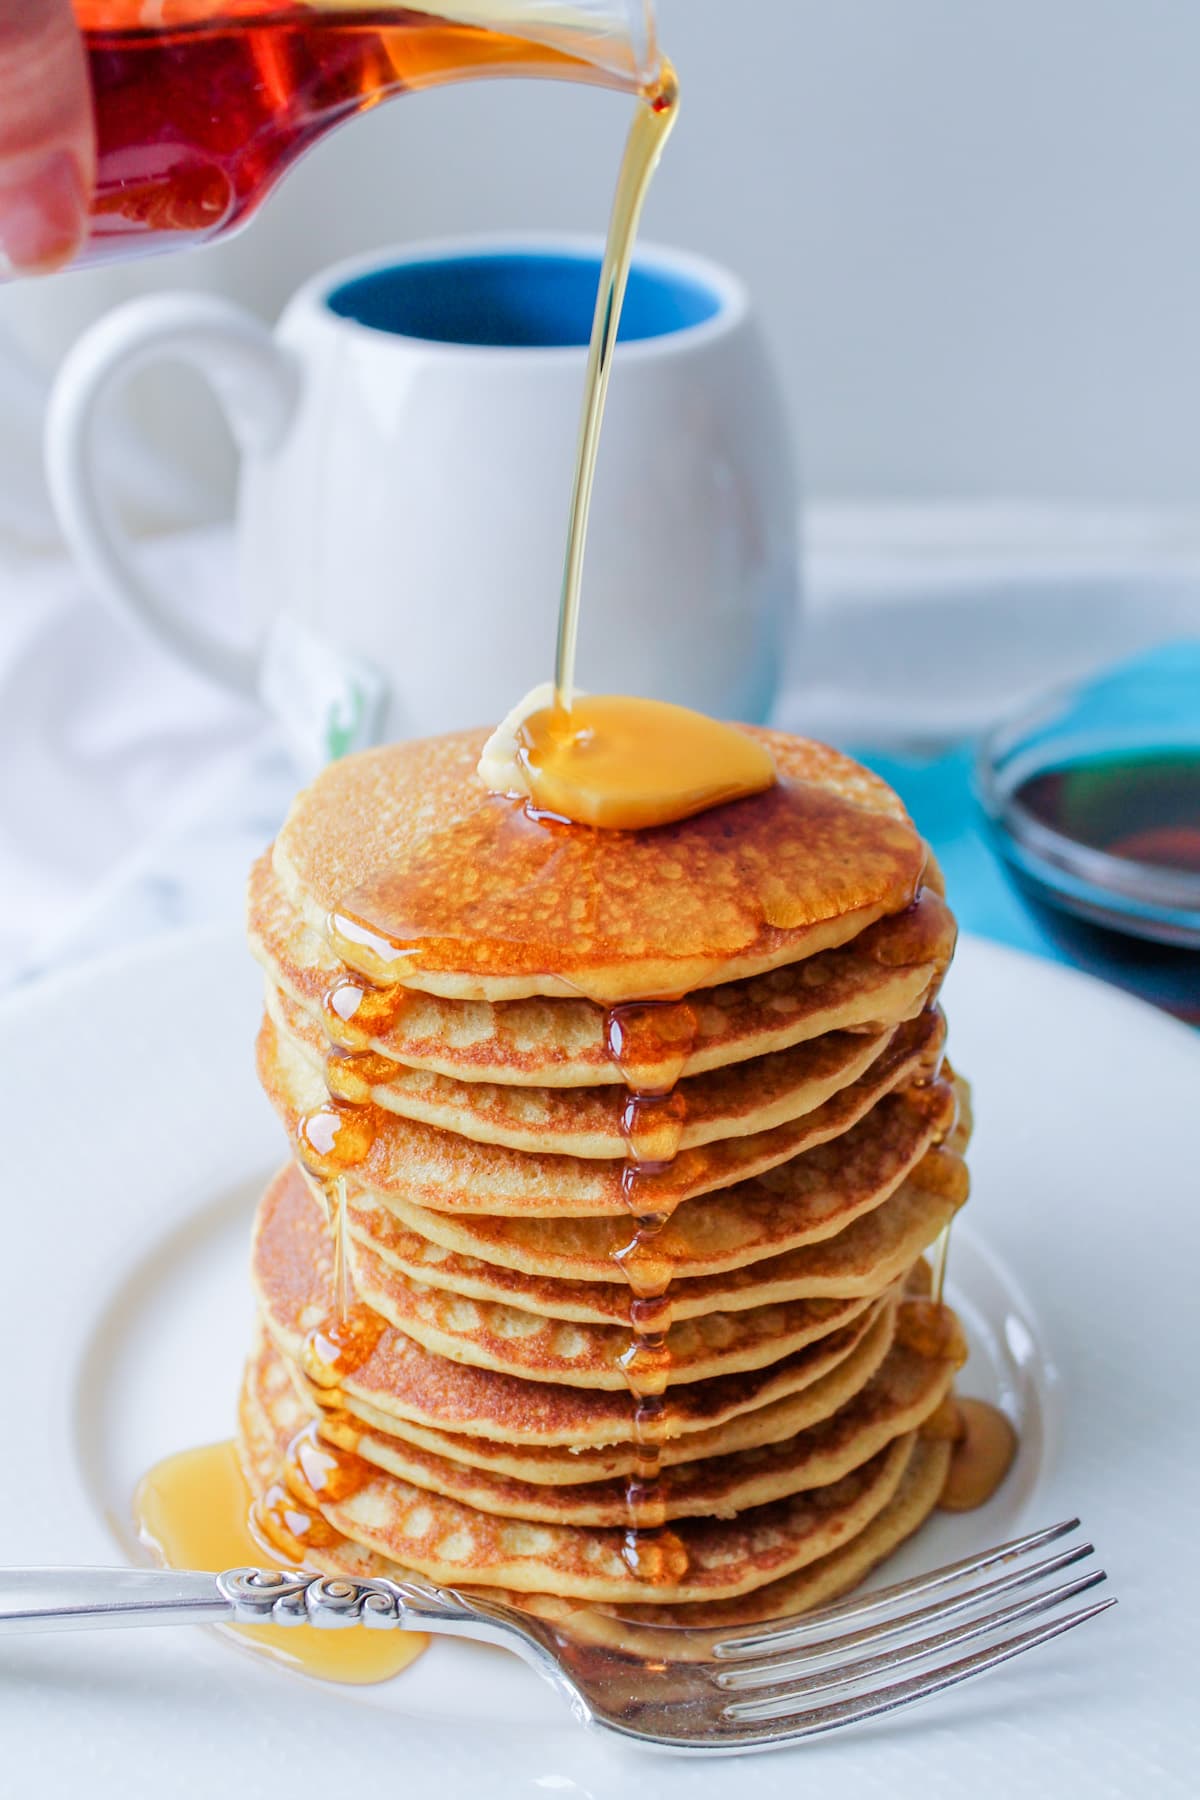 A stack of gluten free grains based brown rice flour pancakes.